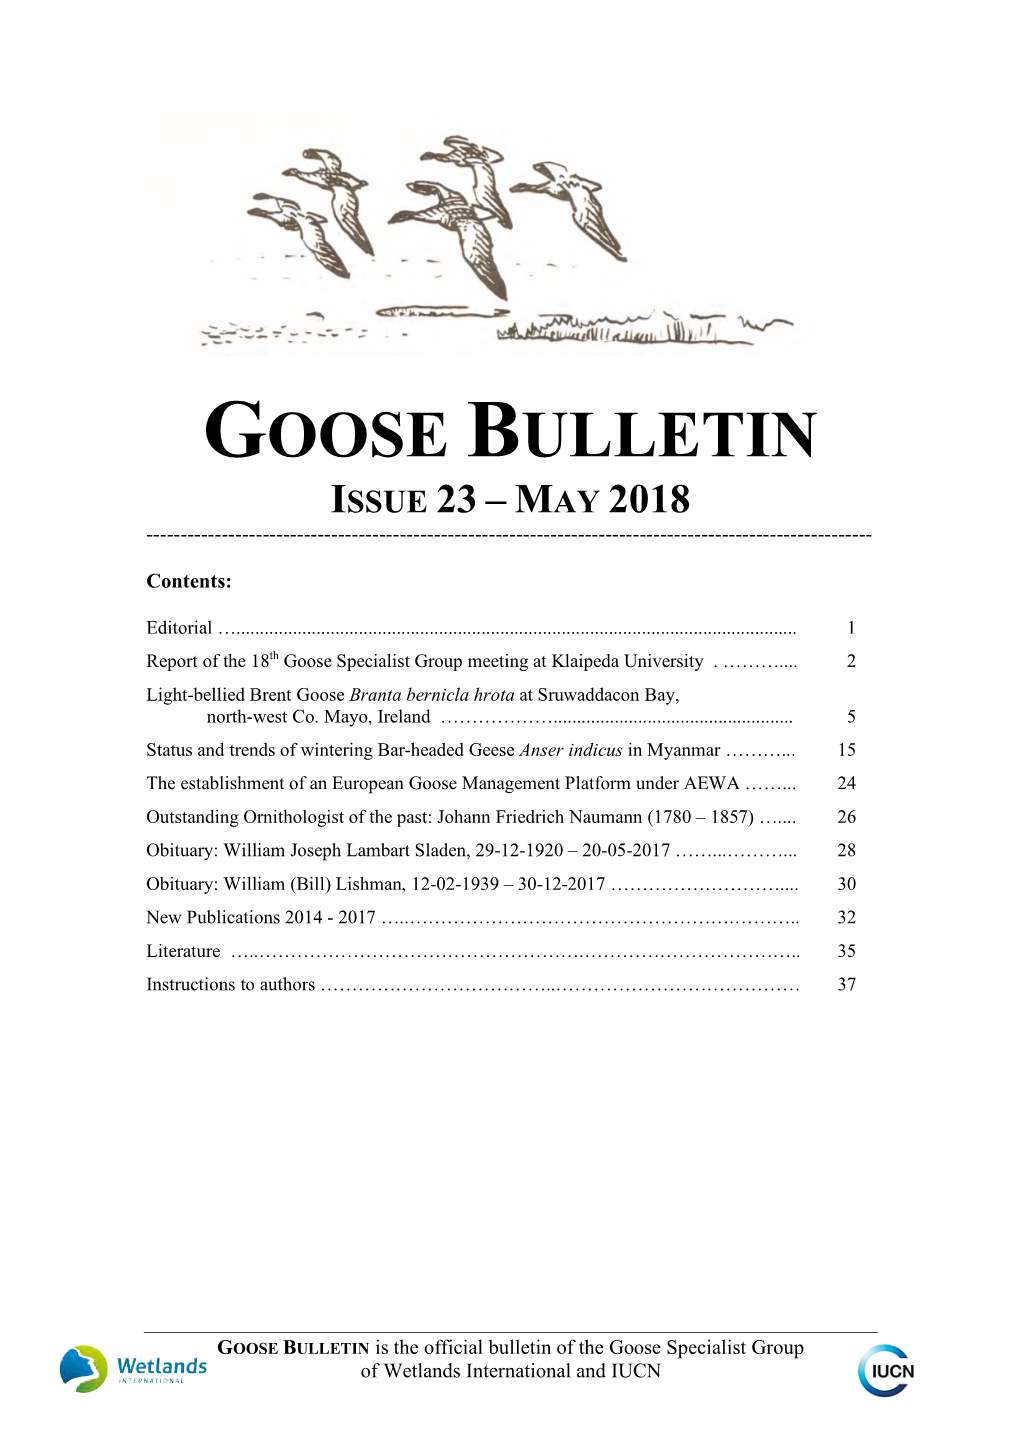 Goose Bulletin Issue 23 – May 2018